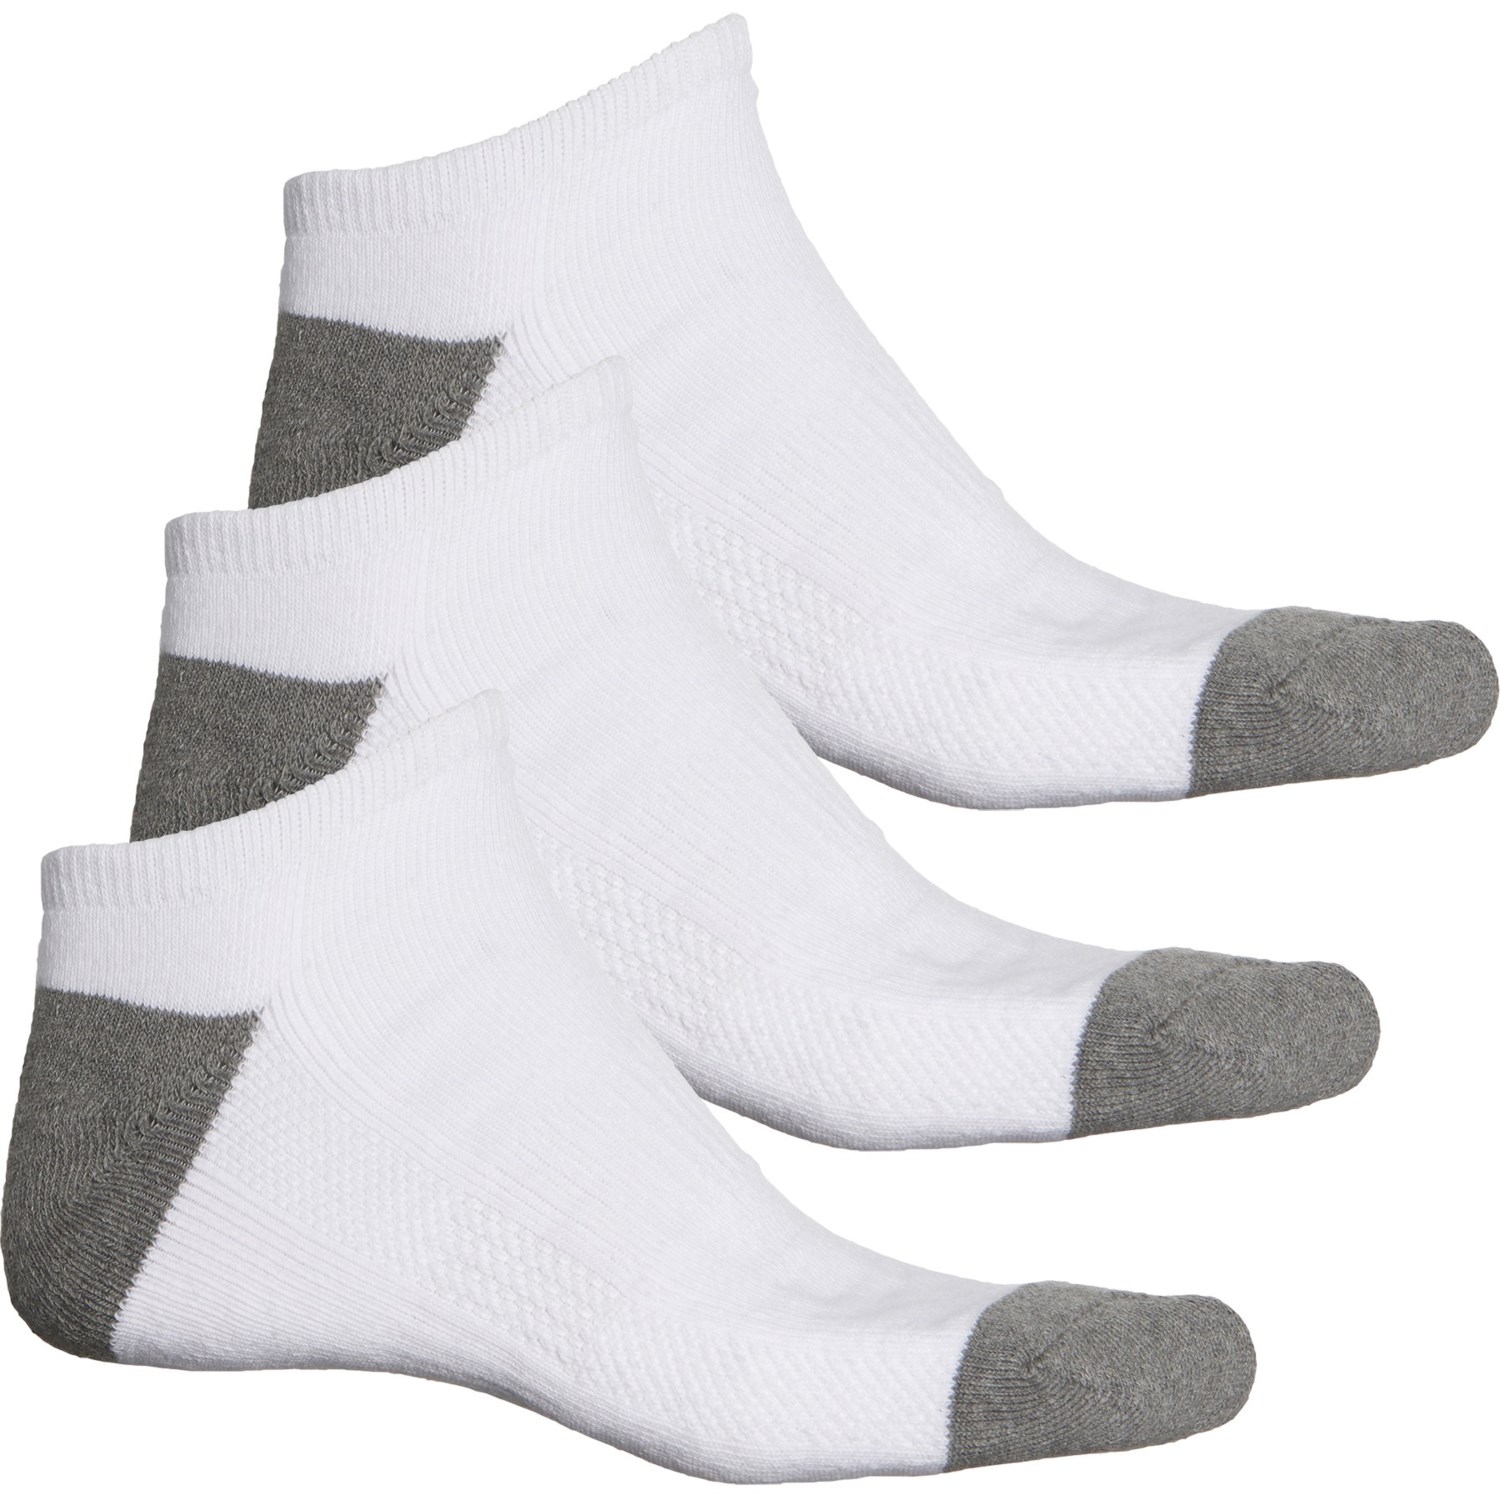 COLUMBIA Half Cushion No-Show Sport Socks - 3-Pack, Below the Ankle (For Men)